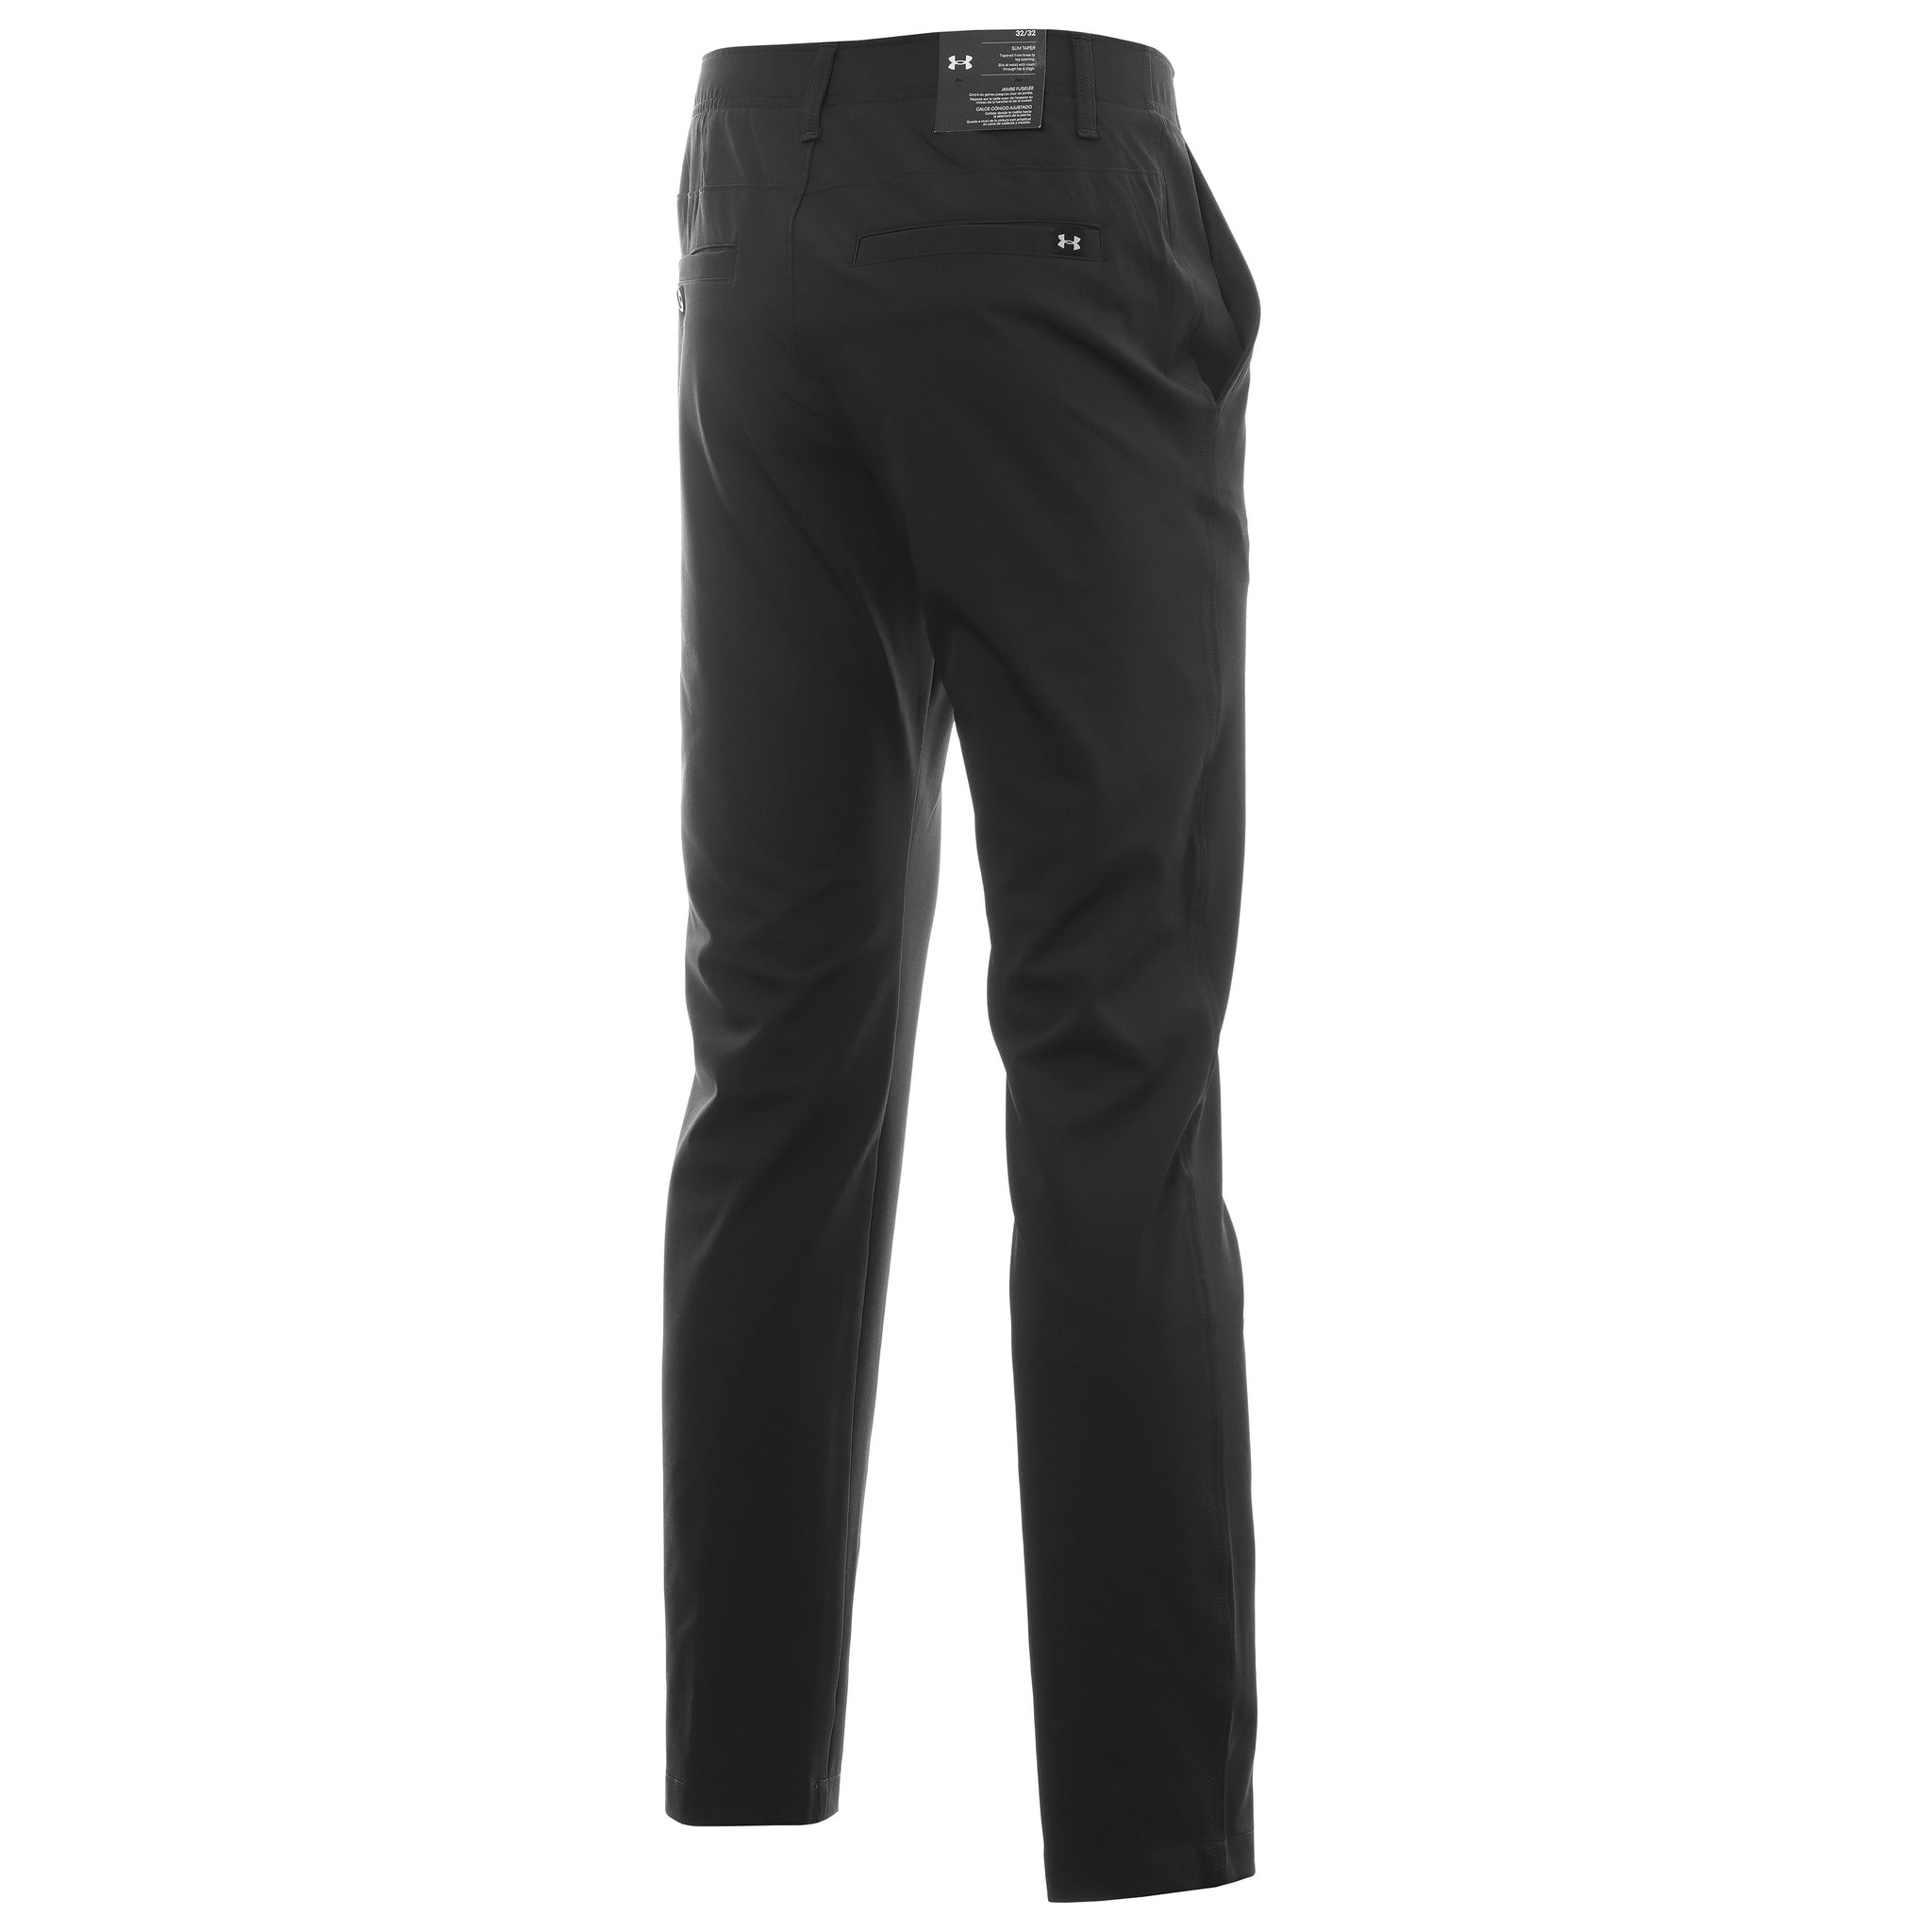 Under Armour Golf Men's Drive Tapered Pants